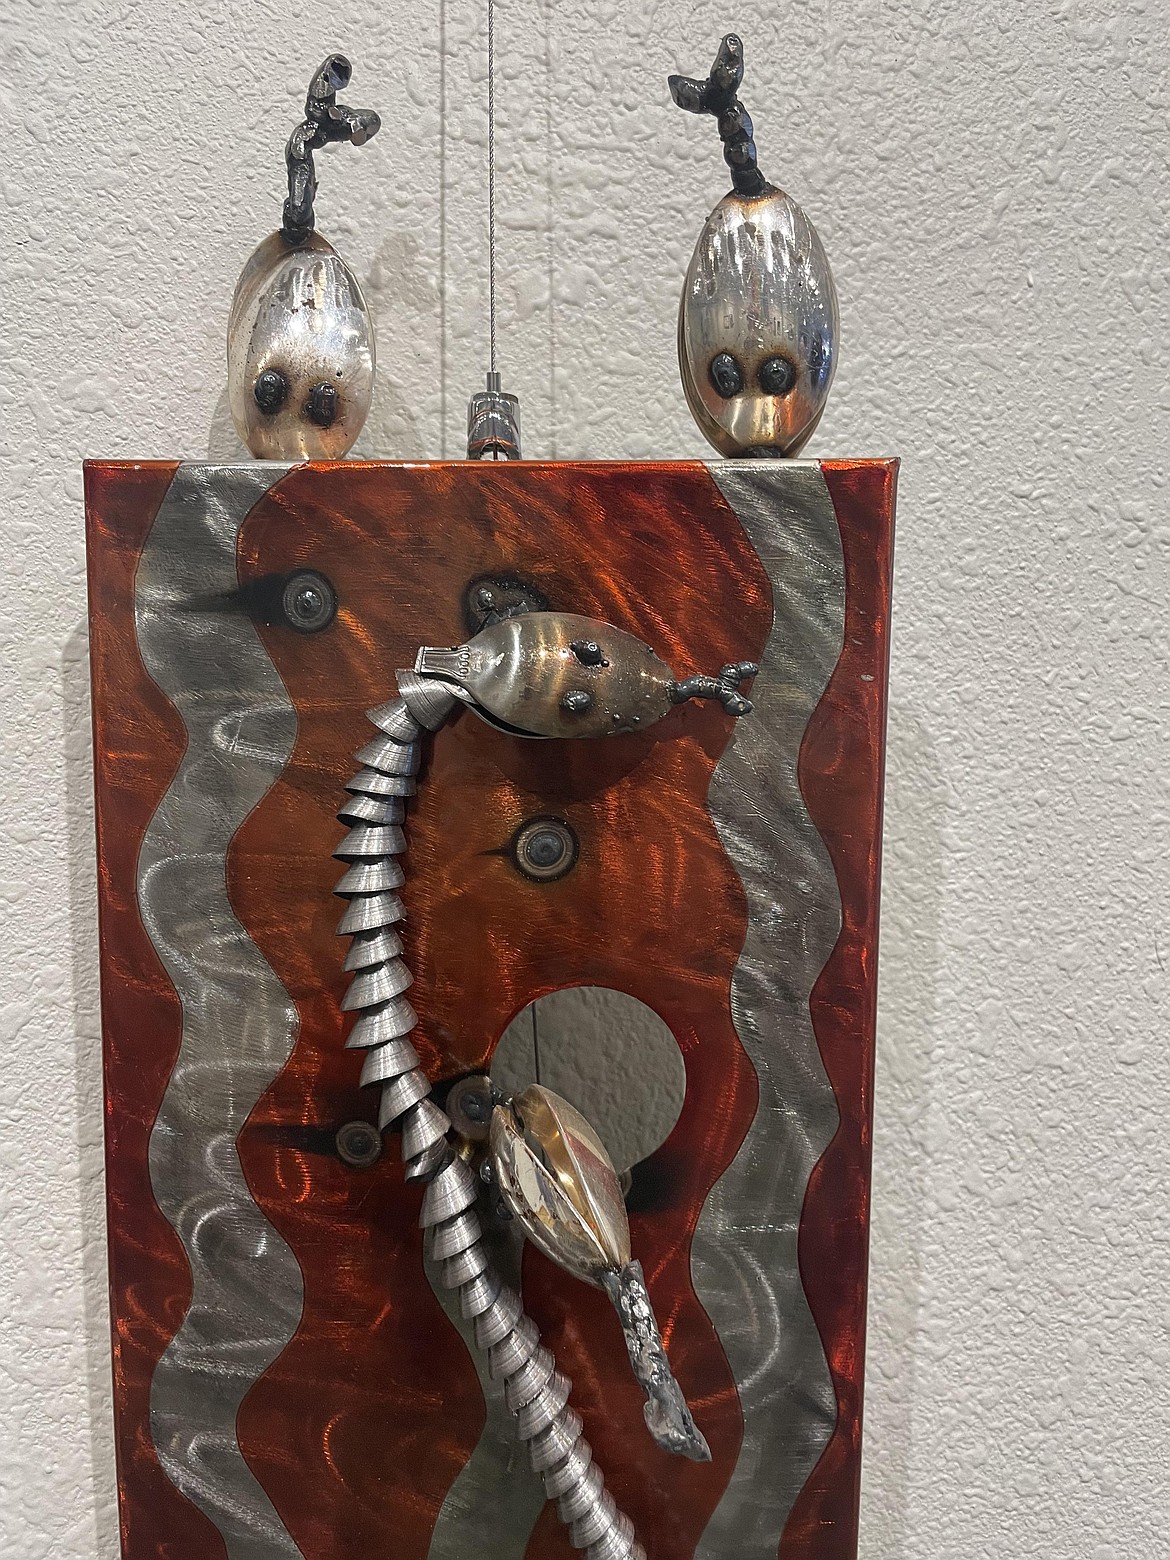 A closeup of one of Andrea Johnson’s metal sculptures featuring snakes made of spoons and flexible plumbing pipe.